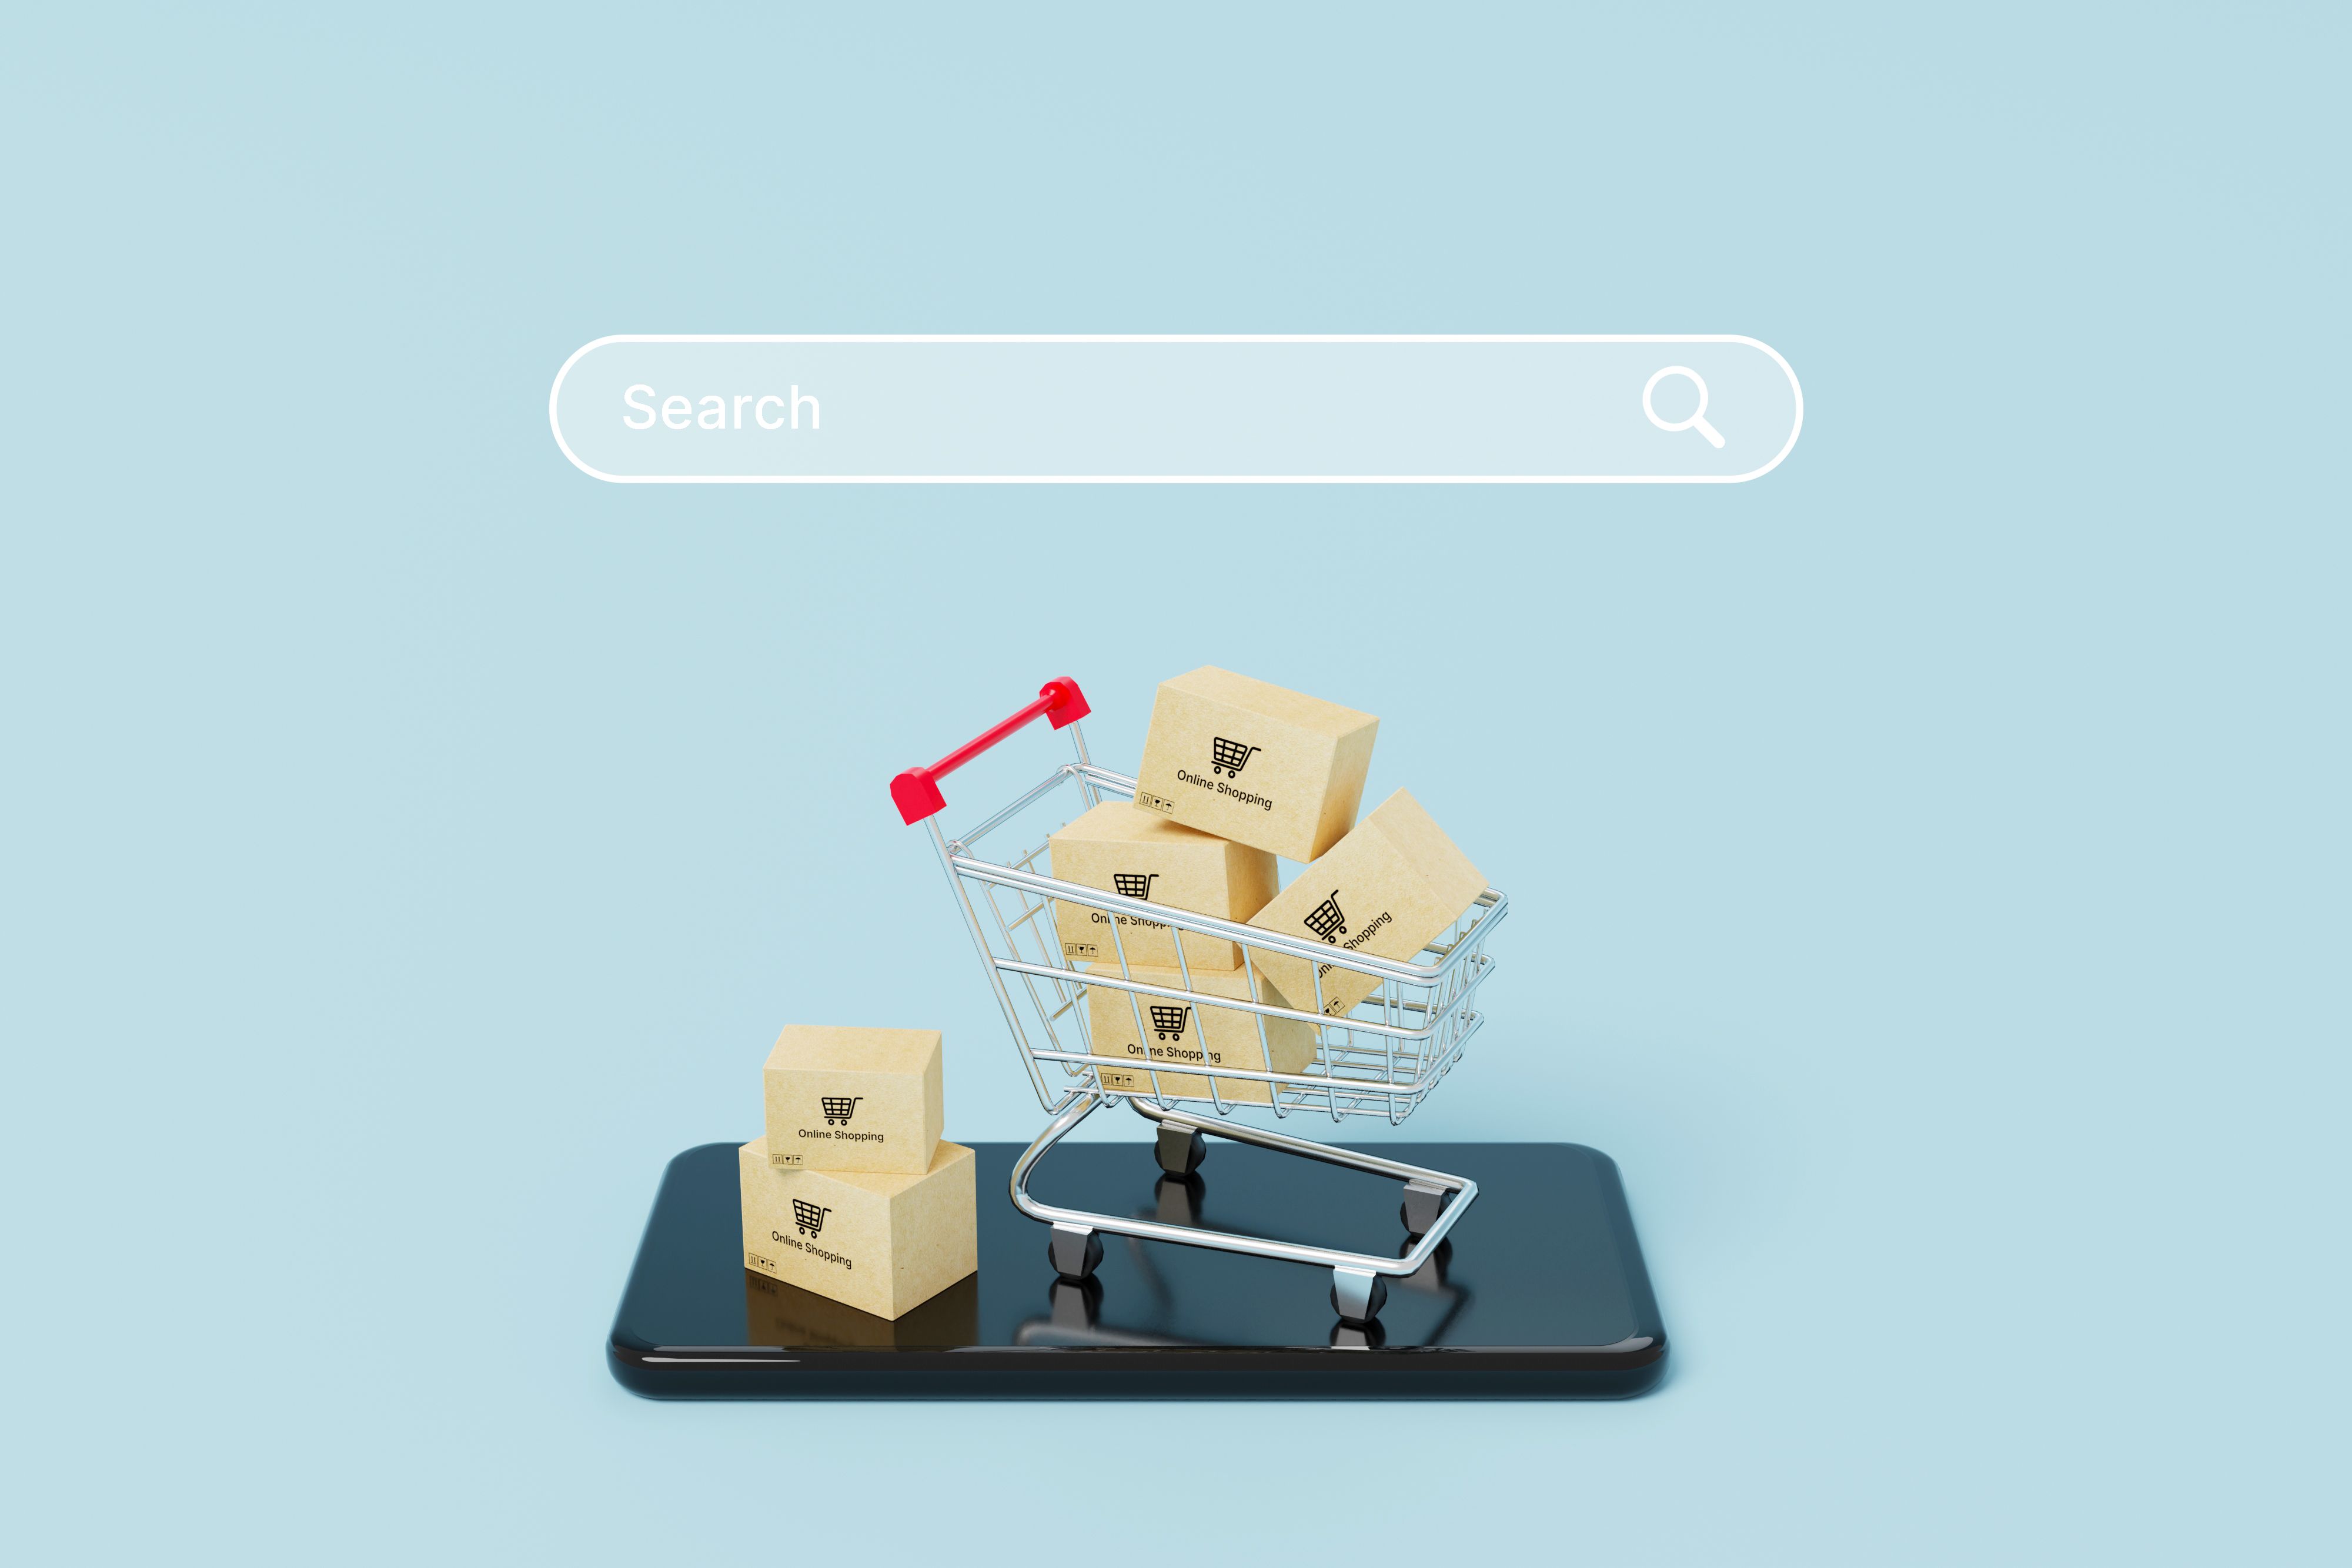 online-shopping-concept-web-mobile-application-ecommerce-smartphone-carton-paper-box-shopping-cart-light-blue-background-with-search-bar-3d-rendering.jpg